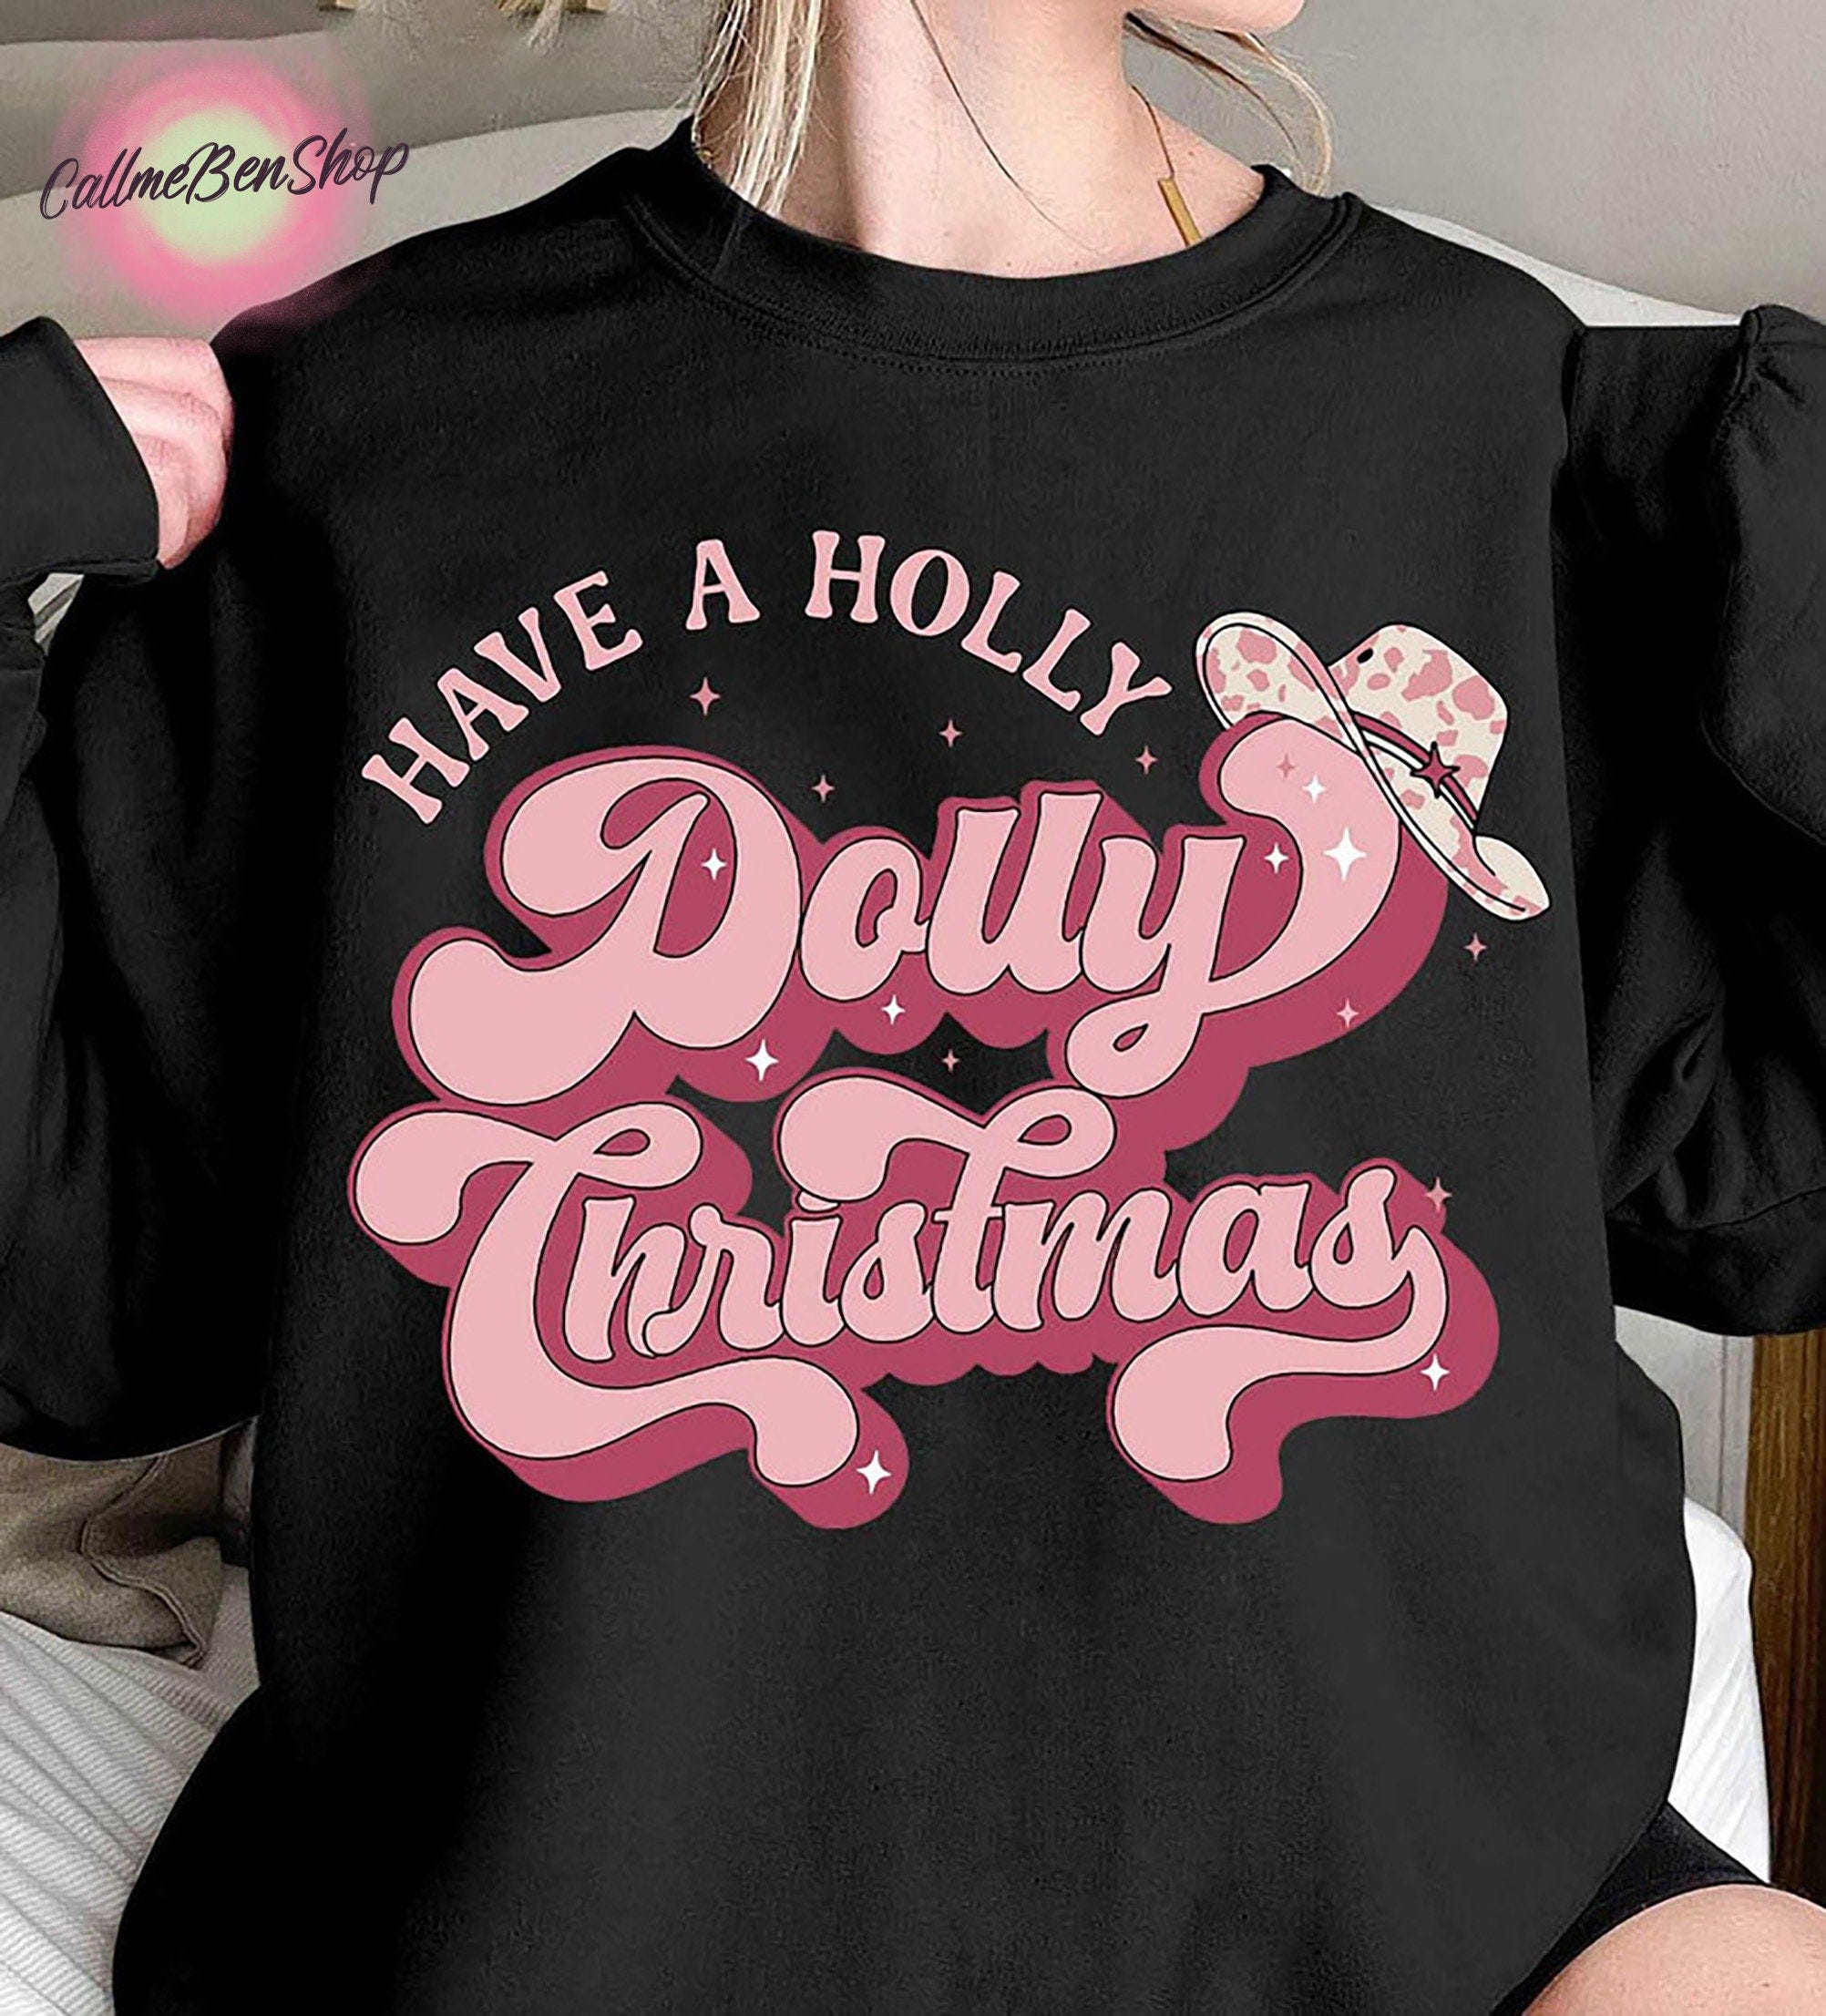 Have A Holly Dolly Christmas Unisex T-Shirt, Holly Dolly Christmas Shirt, Dolly Parton Shirt, Christmas Shirt, Dolly Parton Gifts, Xmas Gift